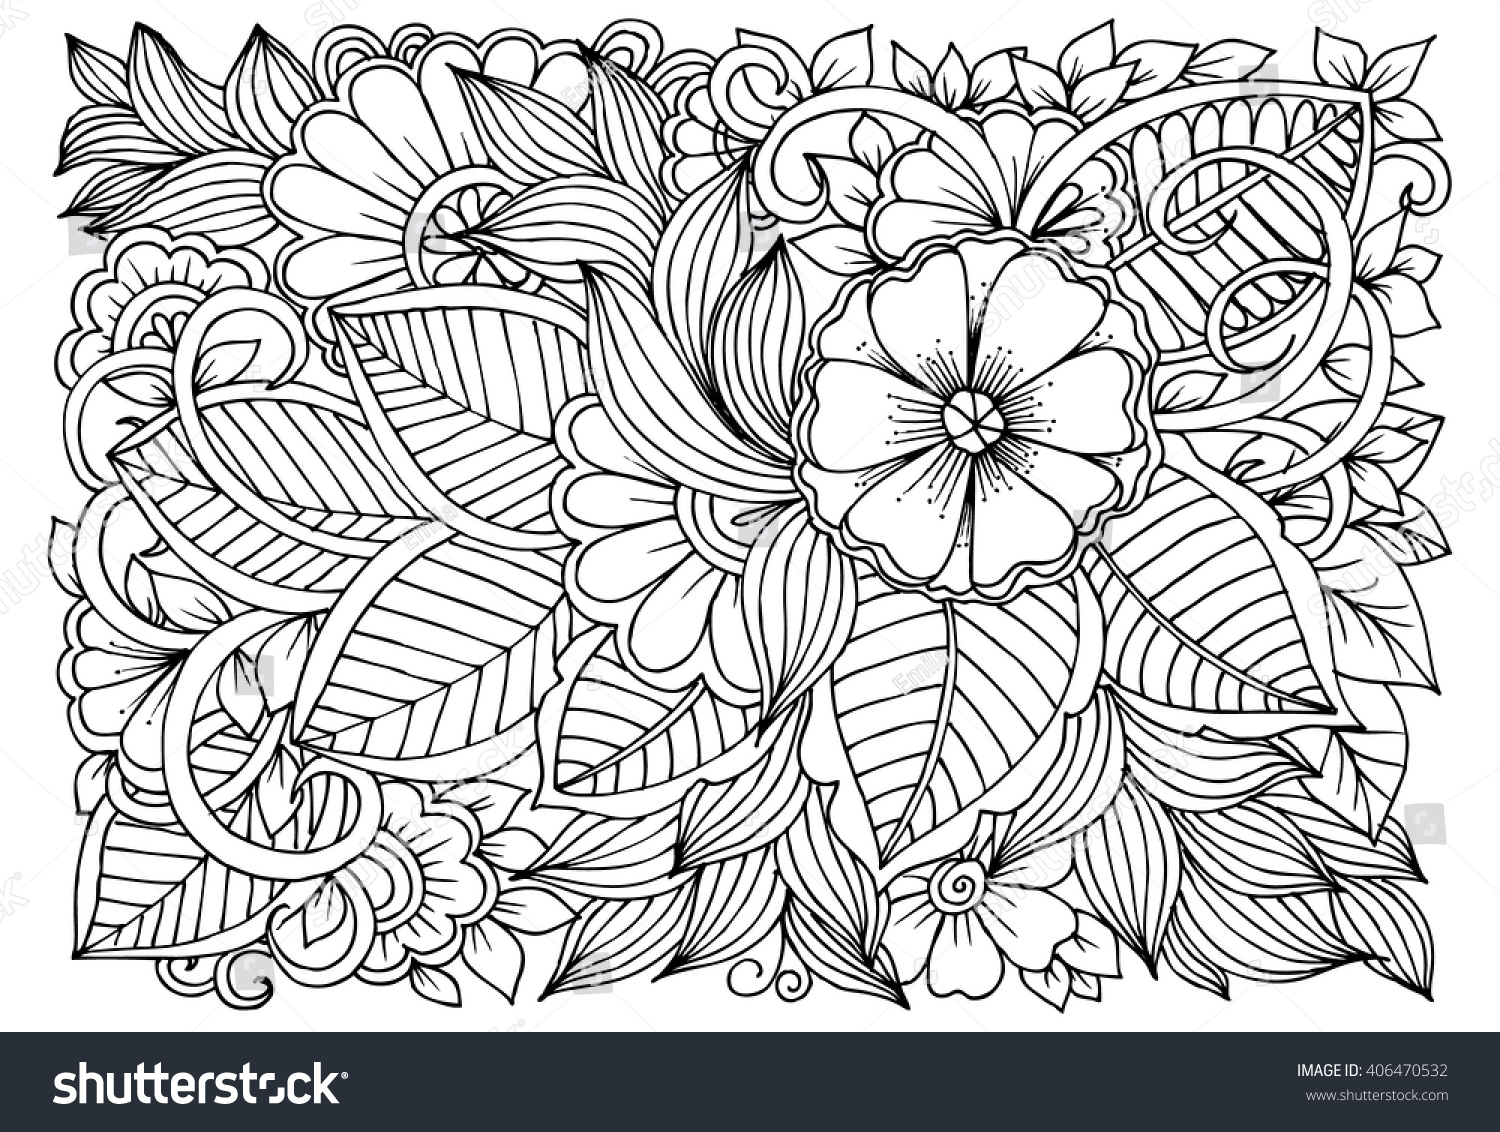 Zentangle Floral Doodles In Black And White Coloring